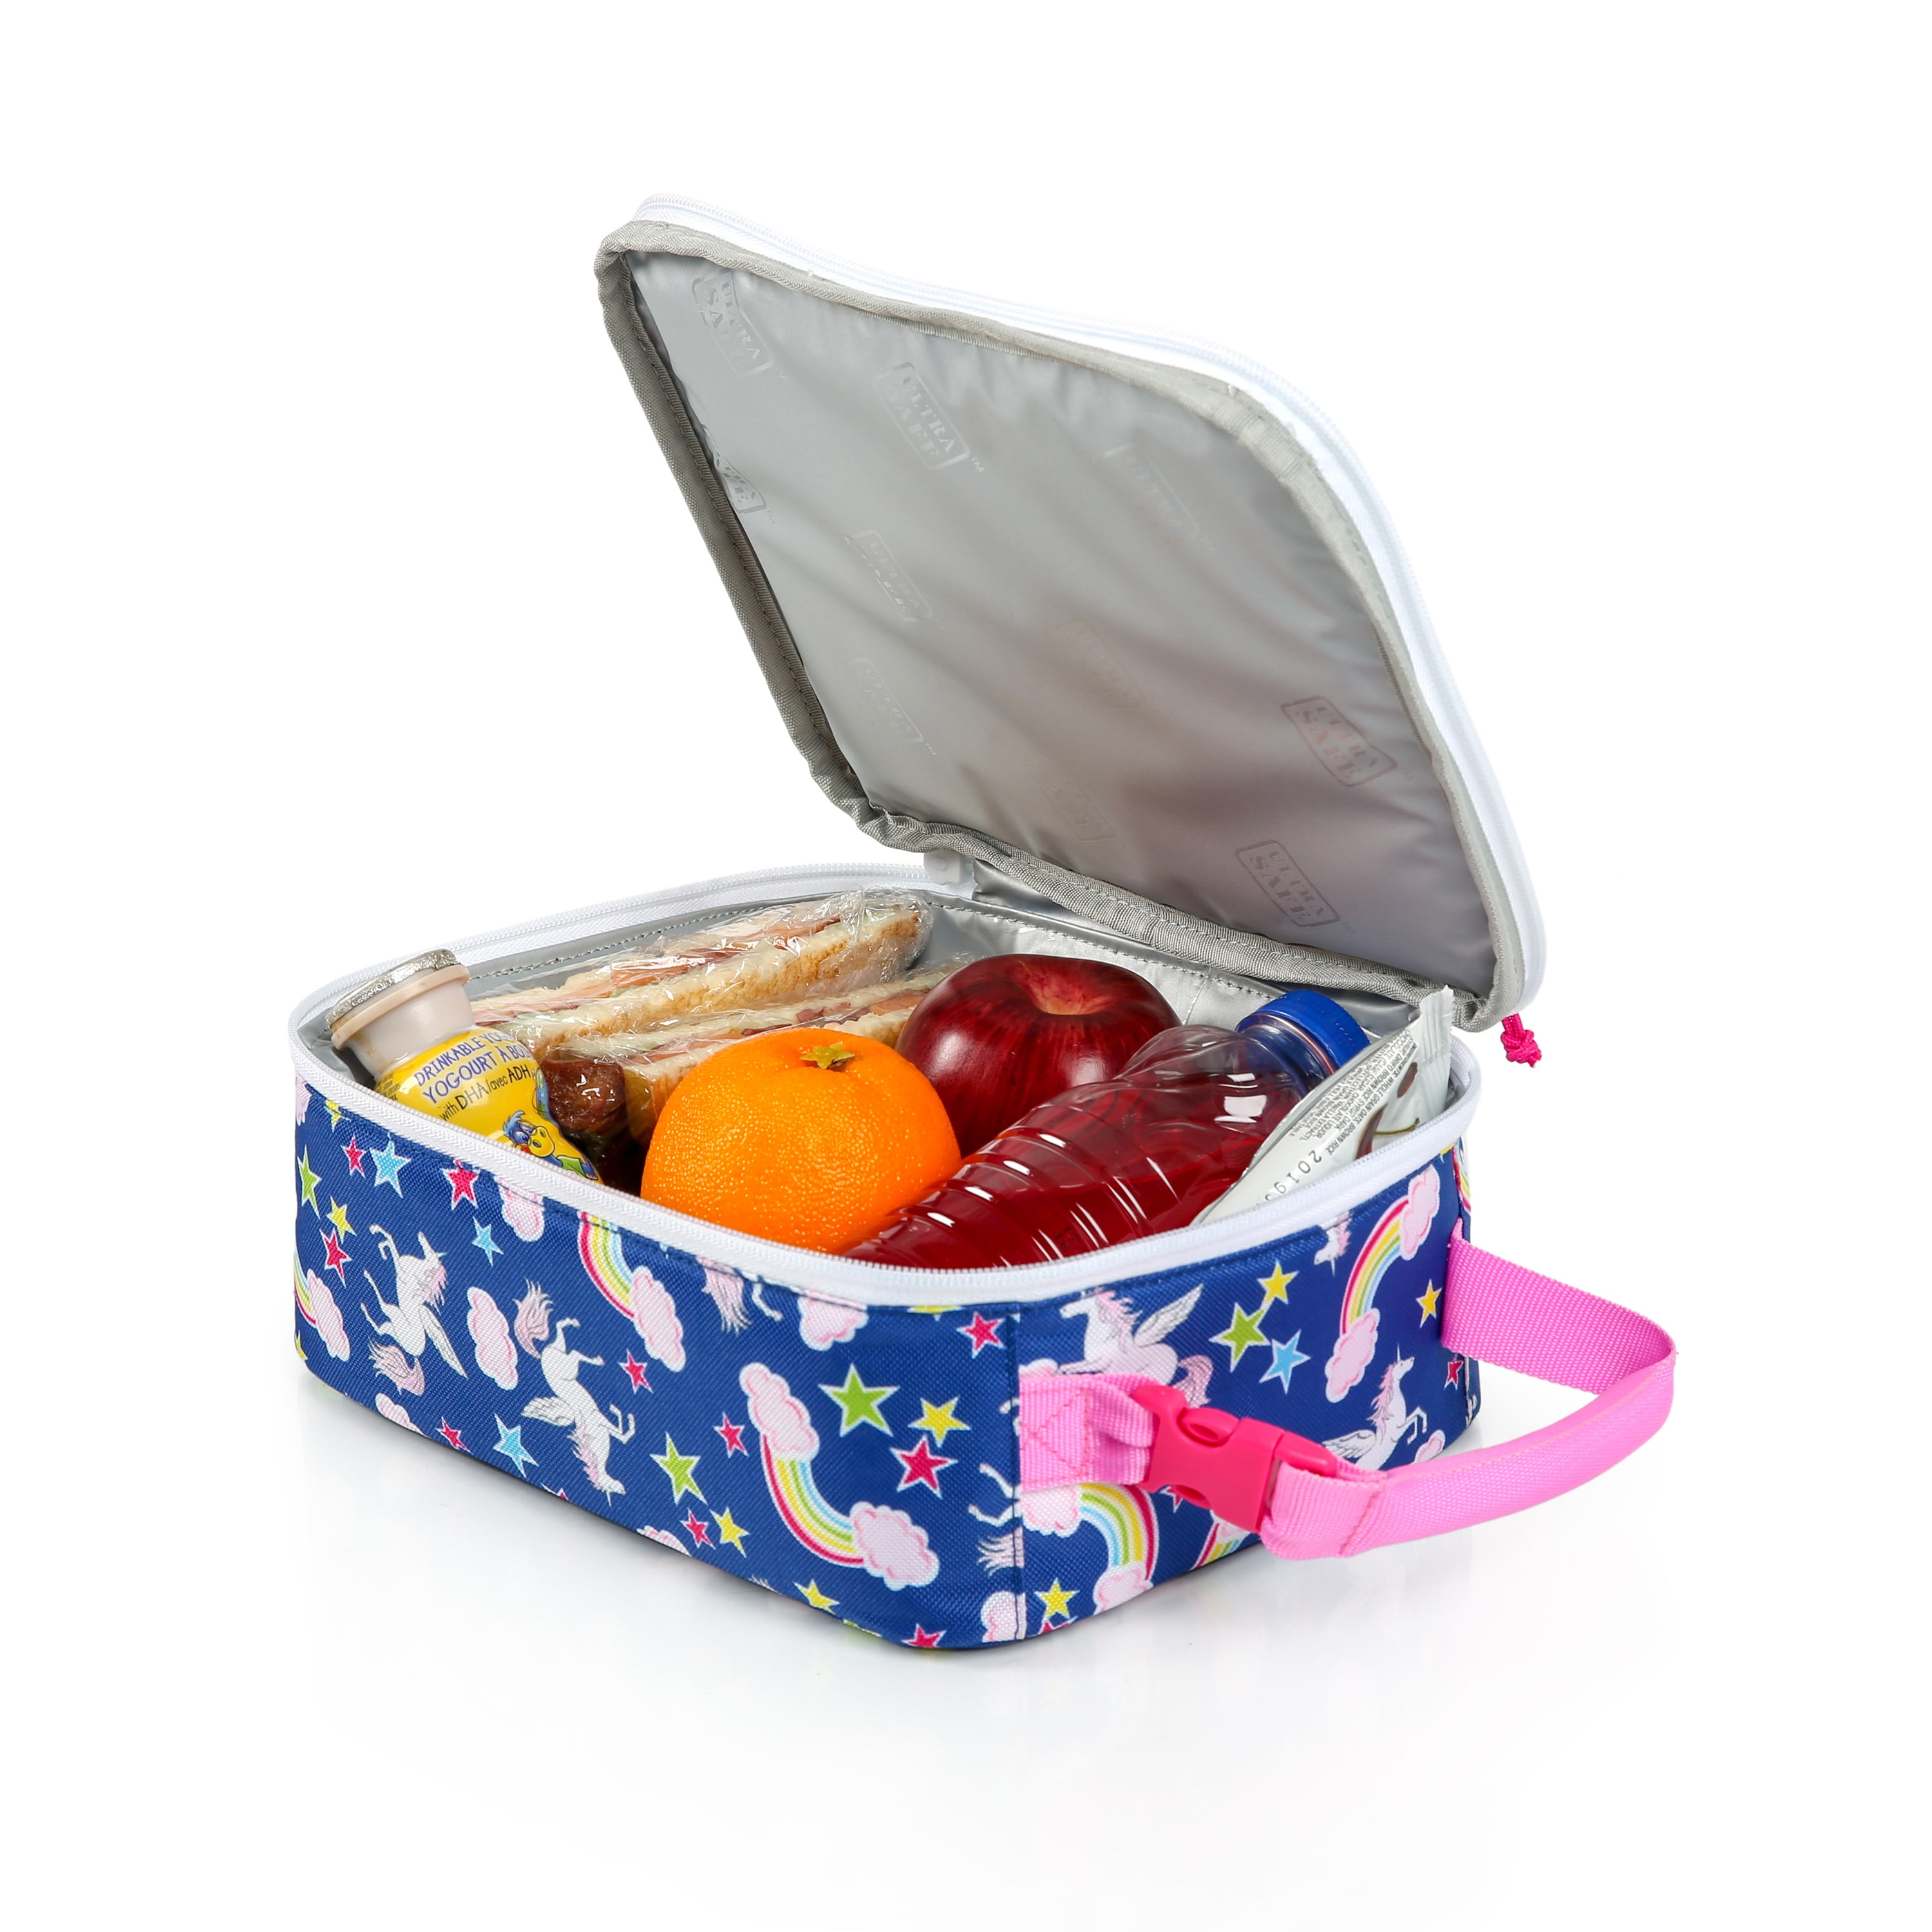 Our coolest kids lunch box (there's a built-in ice pack!)🧊⁠ is